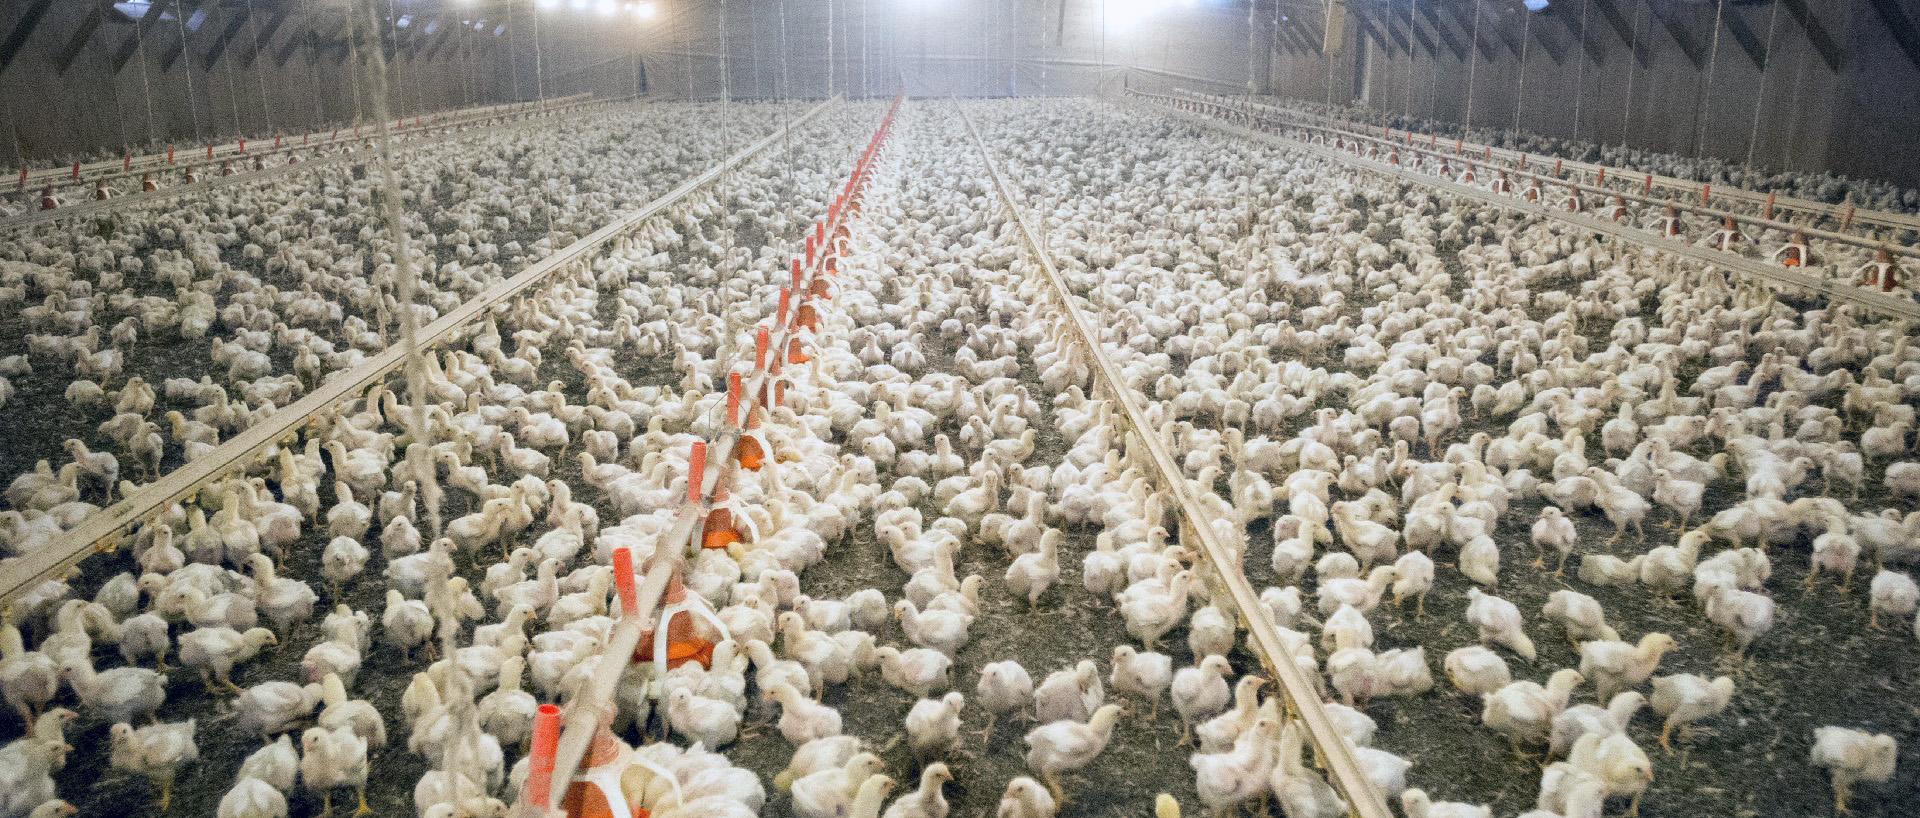 Flock of broiler chickens inside poultry house on eastern shore of Maryland